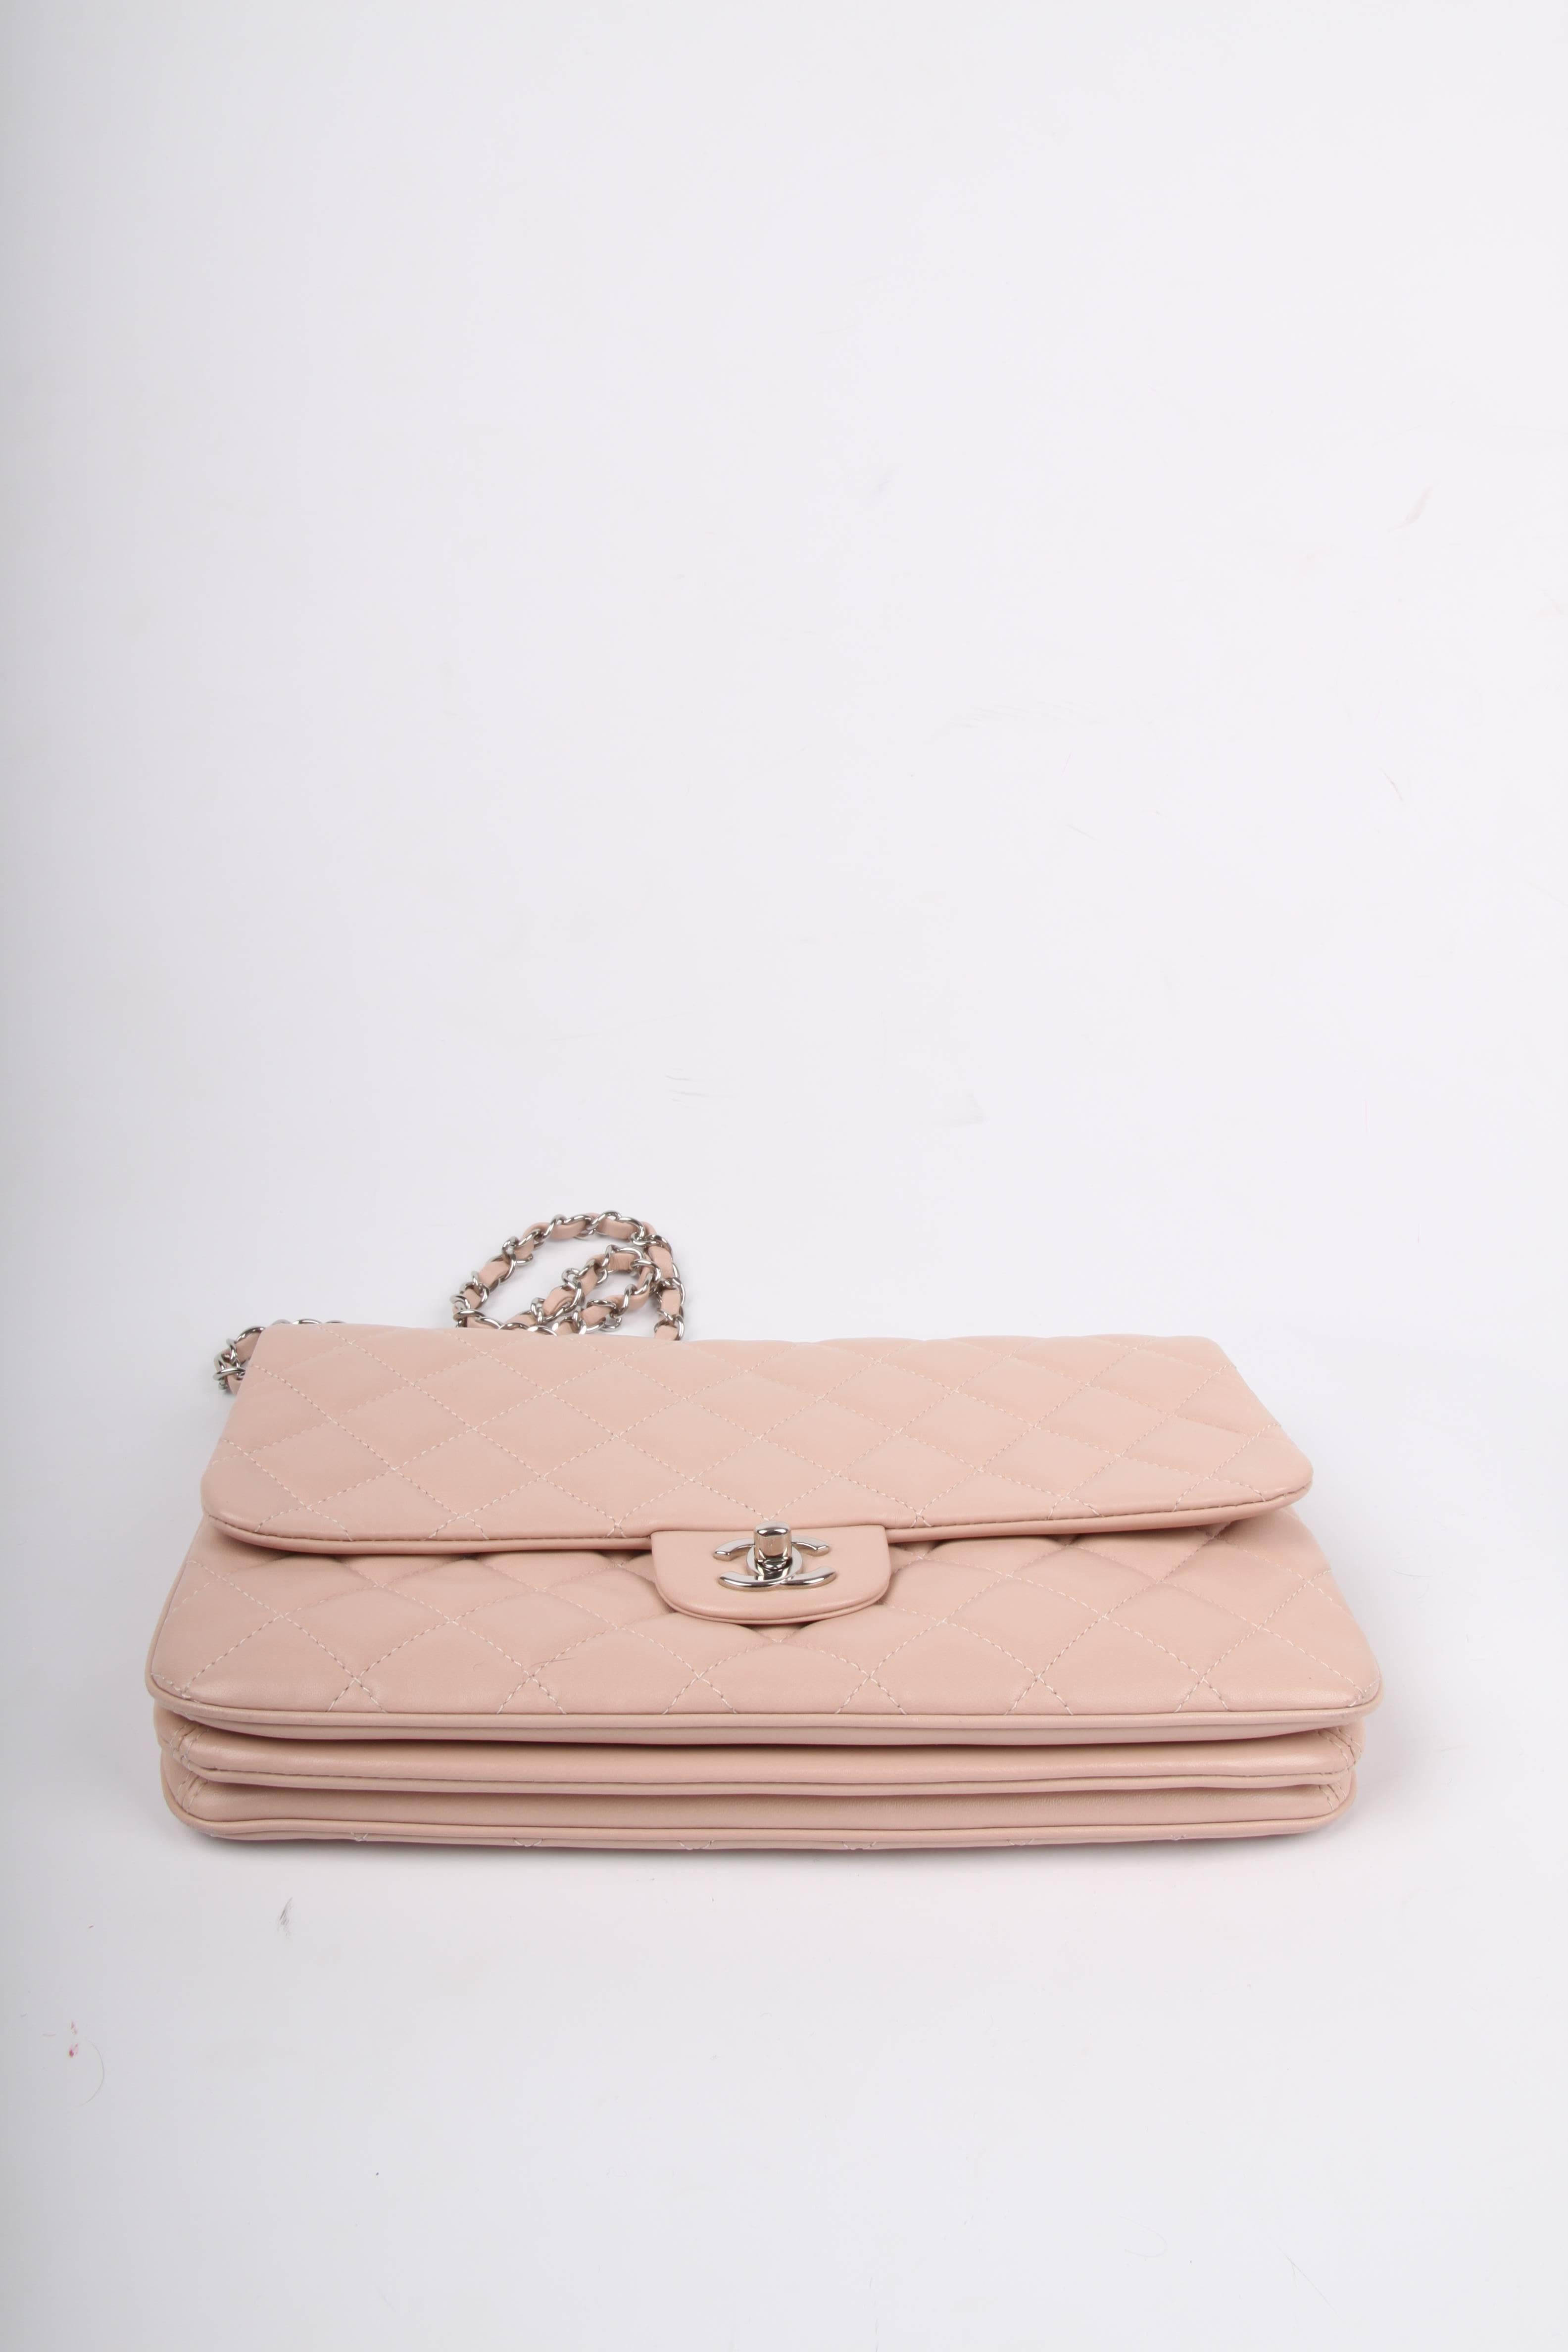 Chanel Classic Flap Bag Jumbo 3 - dusty pink In Excellent Condition For Sale In Baarn, NL